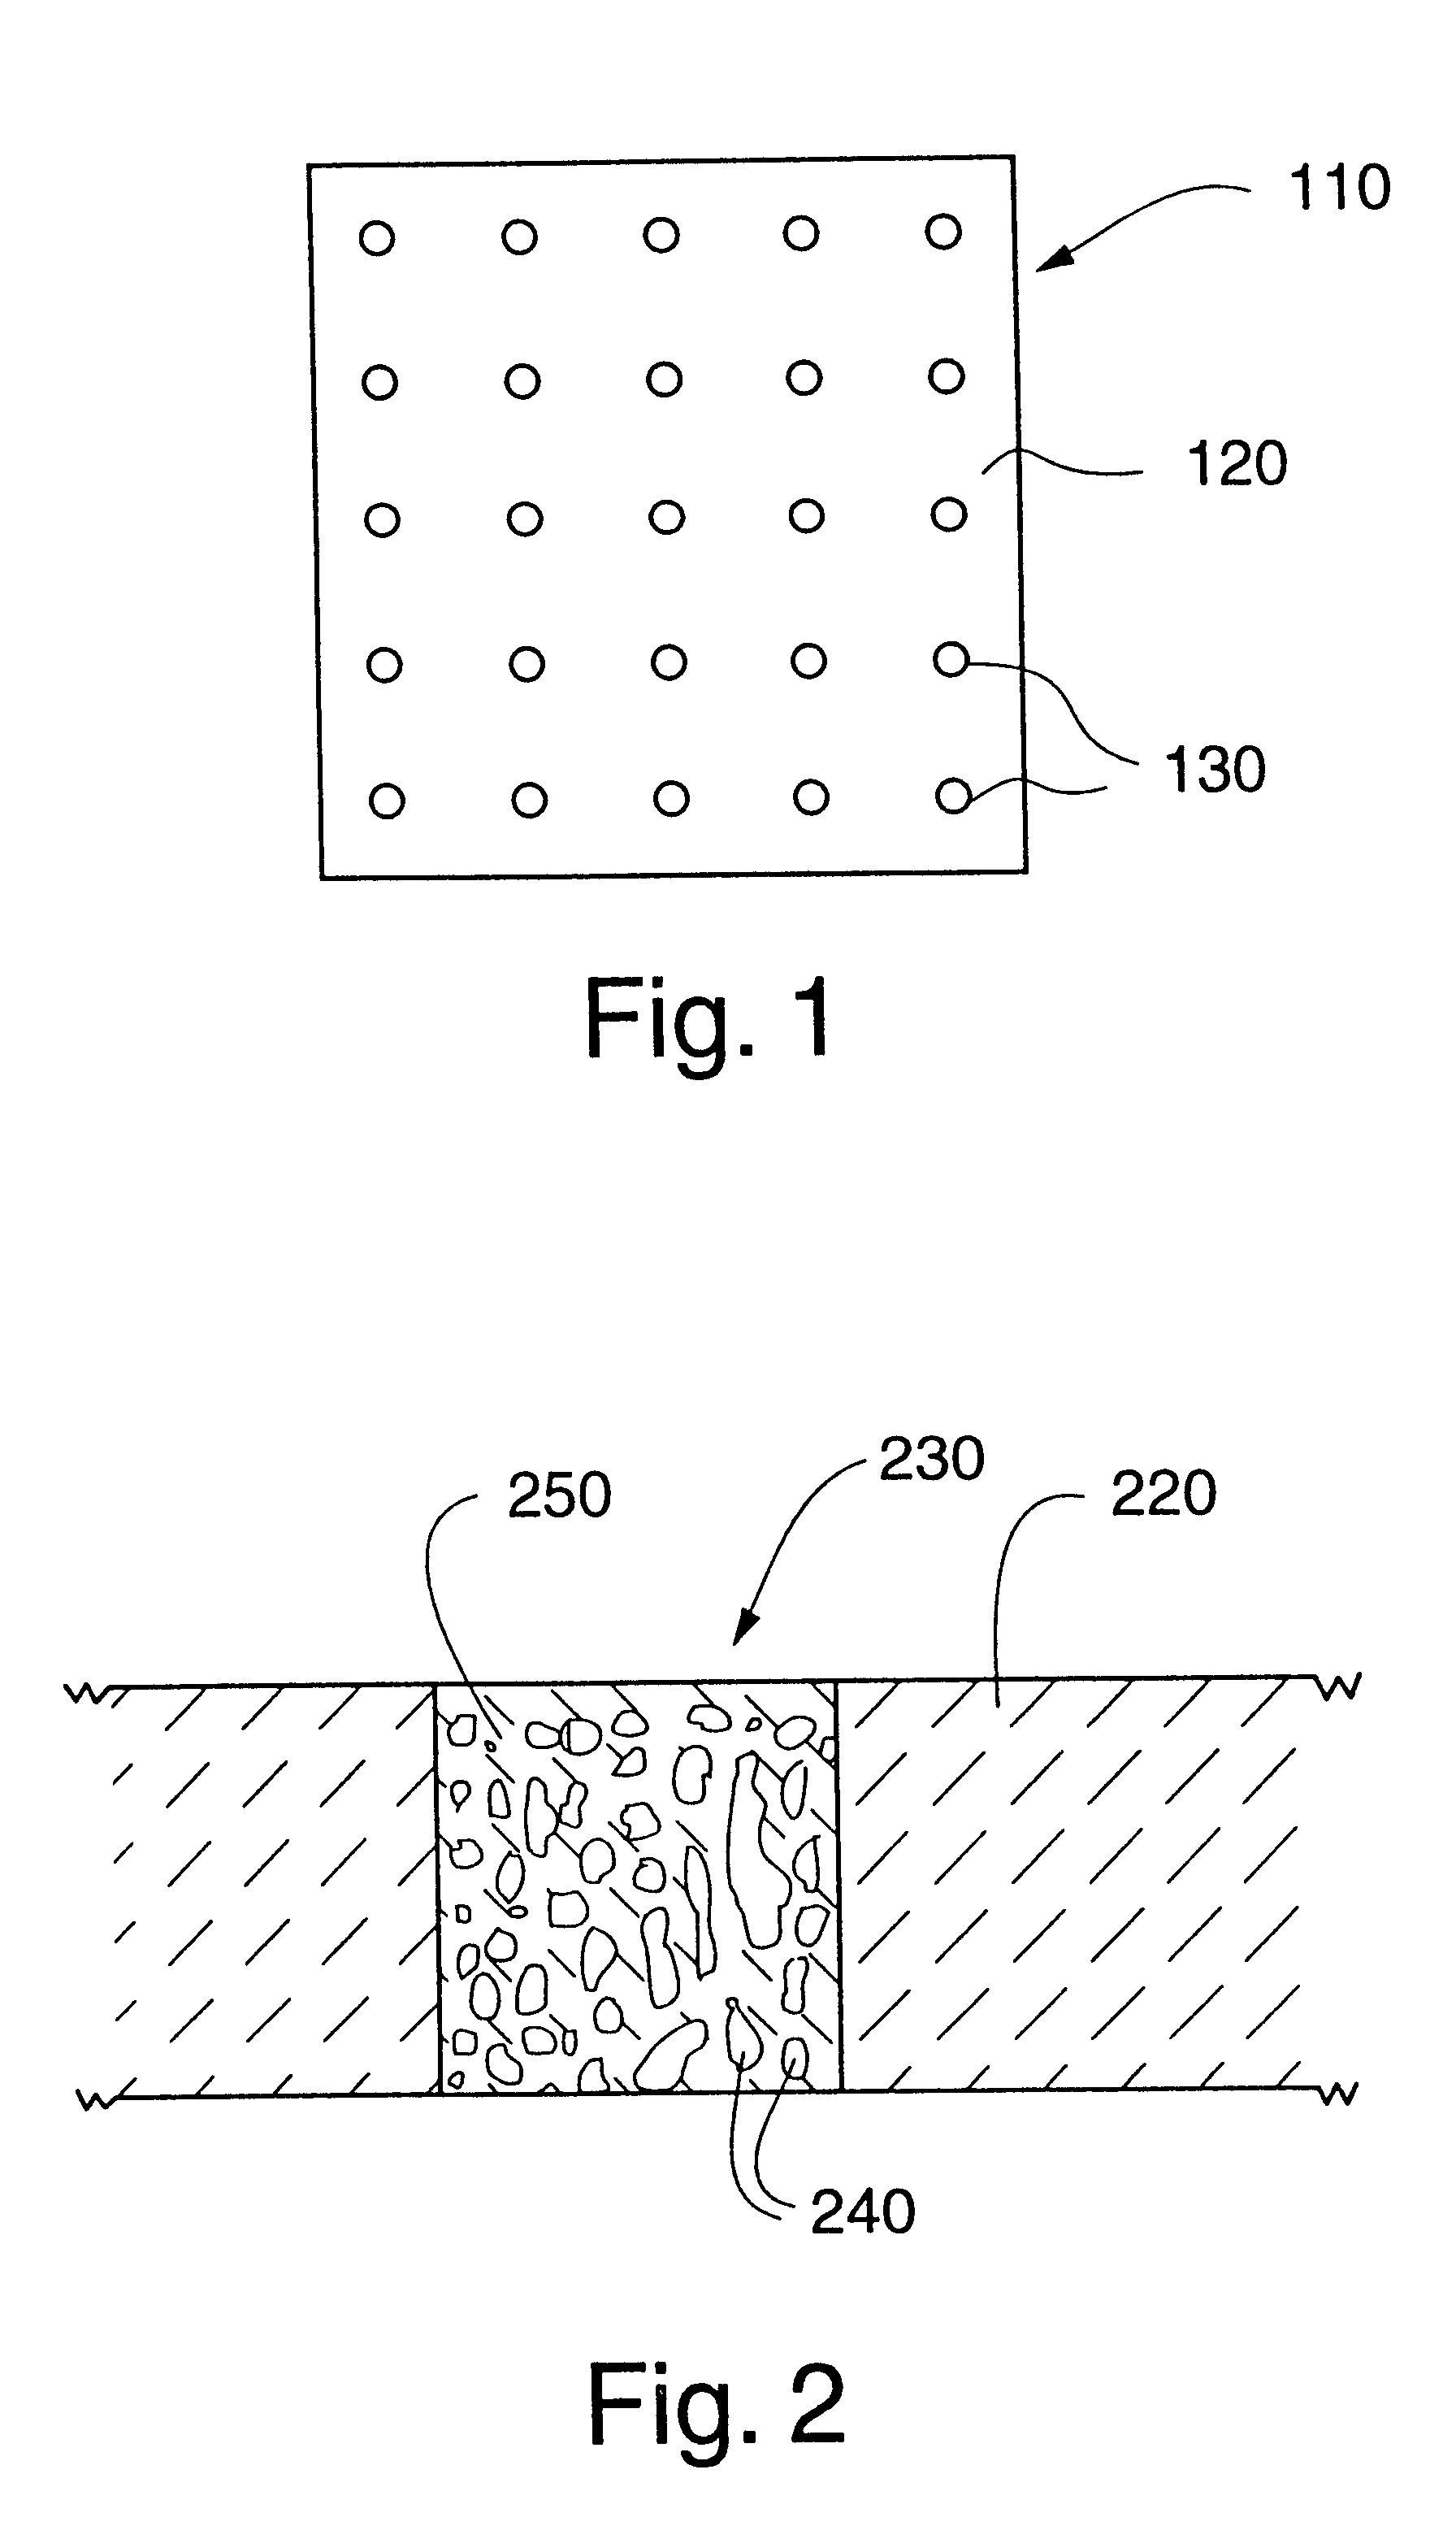 Electronic components incorporating ceramic-metal composites